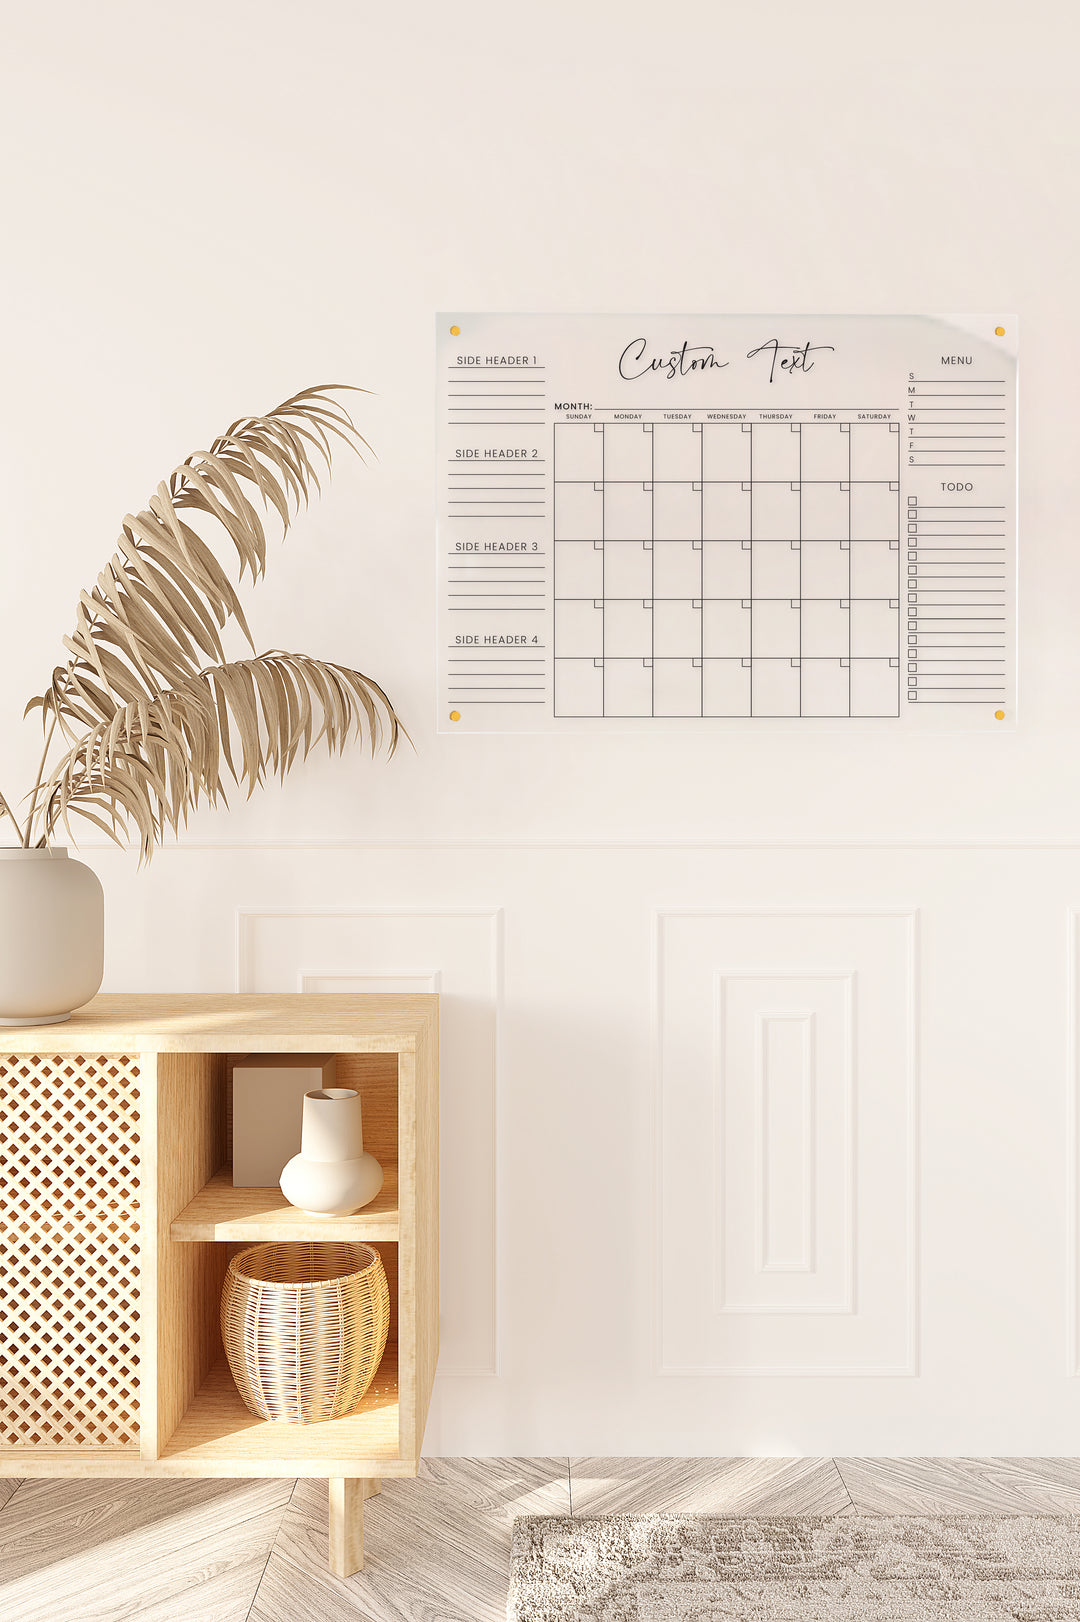 Monthly Wall Calendar with Menu, To-Do List and Custom Lists